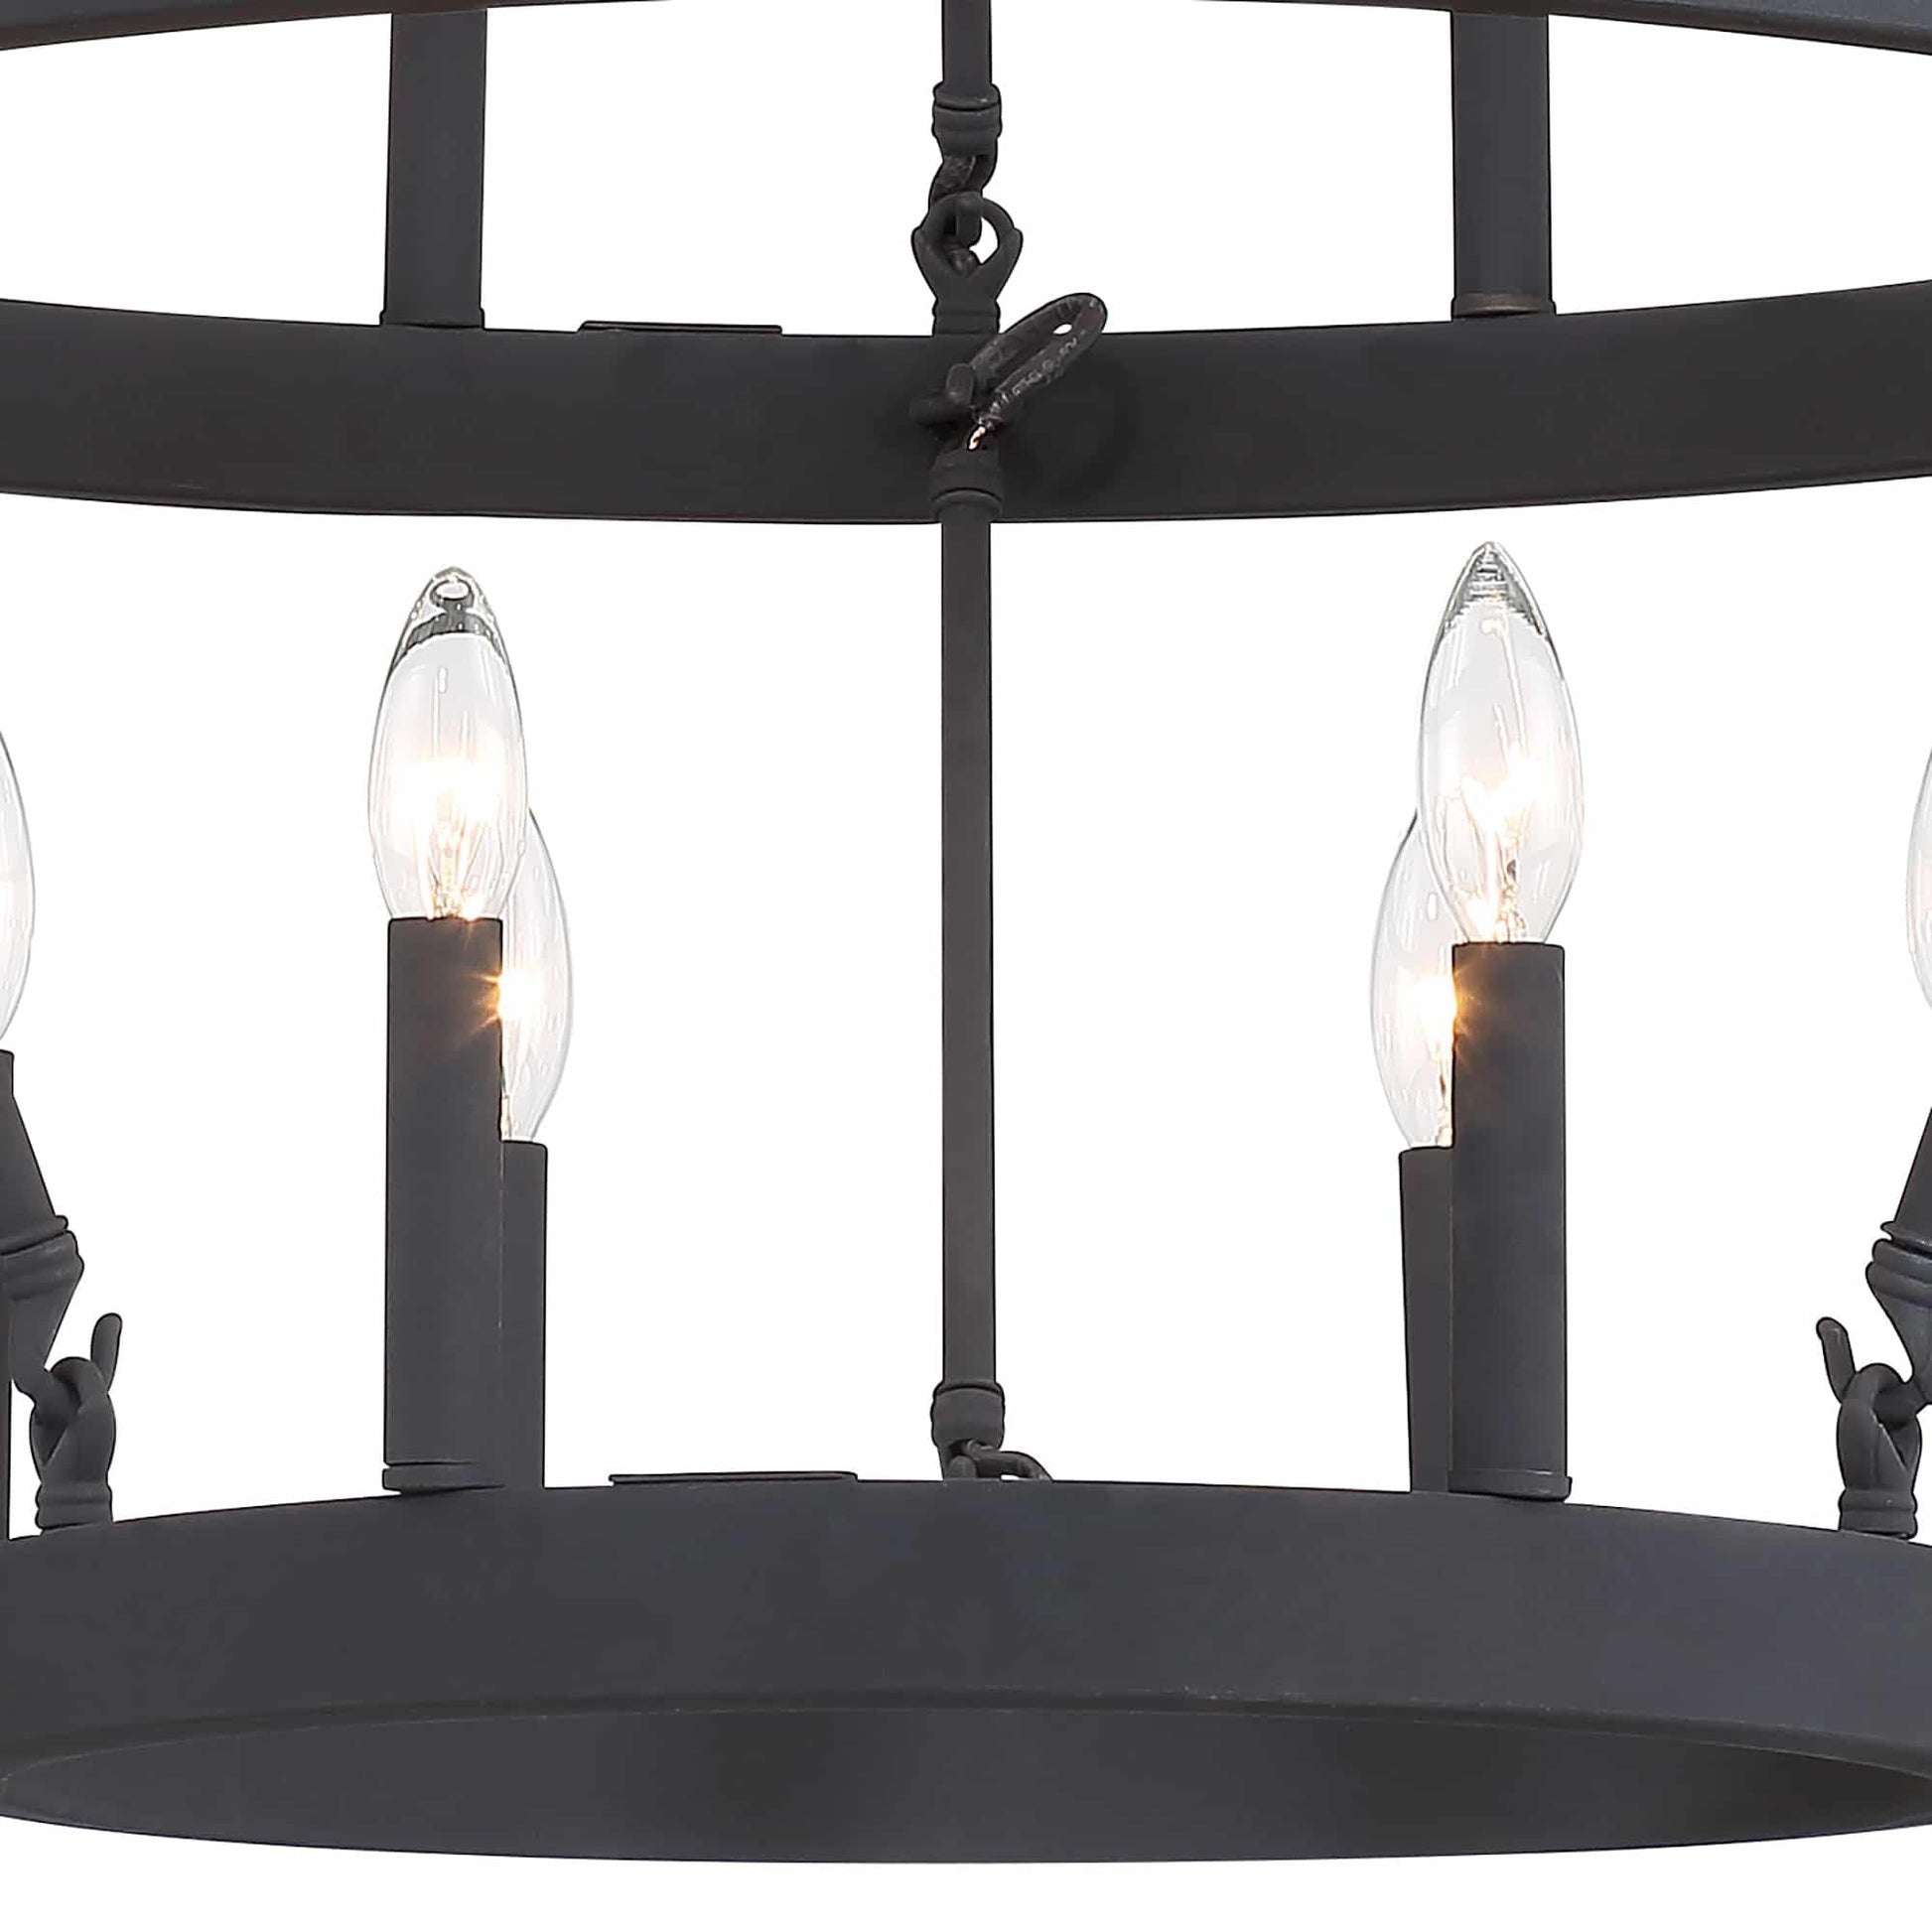 7615 | 15 - Light Candle Style Tiered Chandelier by ACROMA™  UL - ACROMA